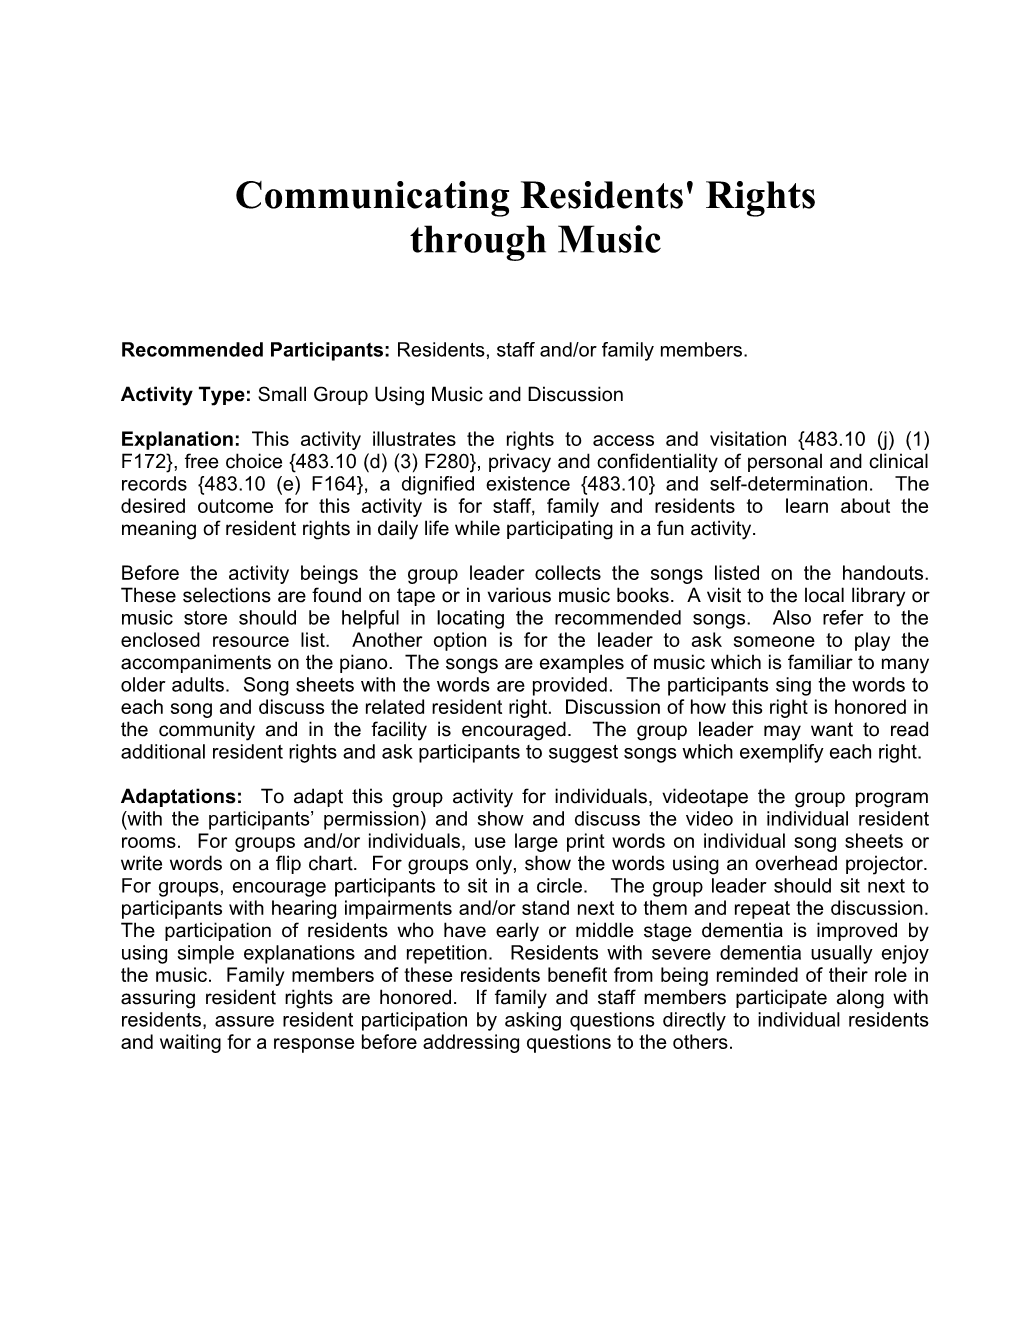 Communicating Residents' Rights Through Music